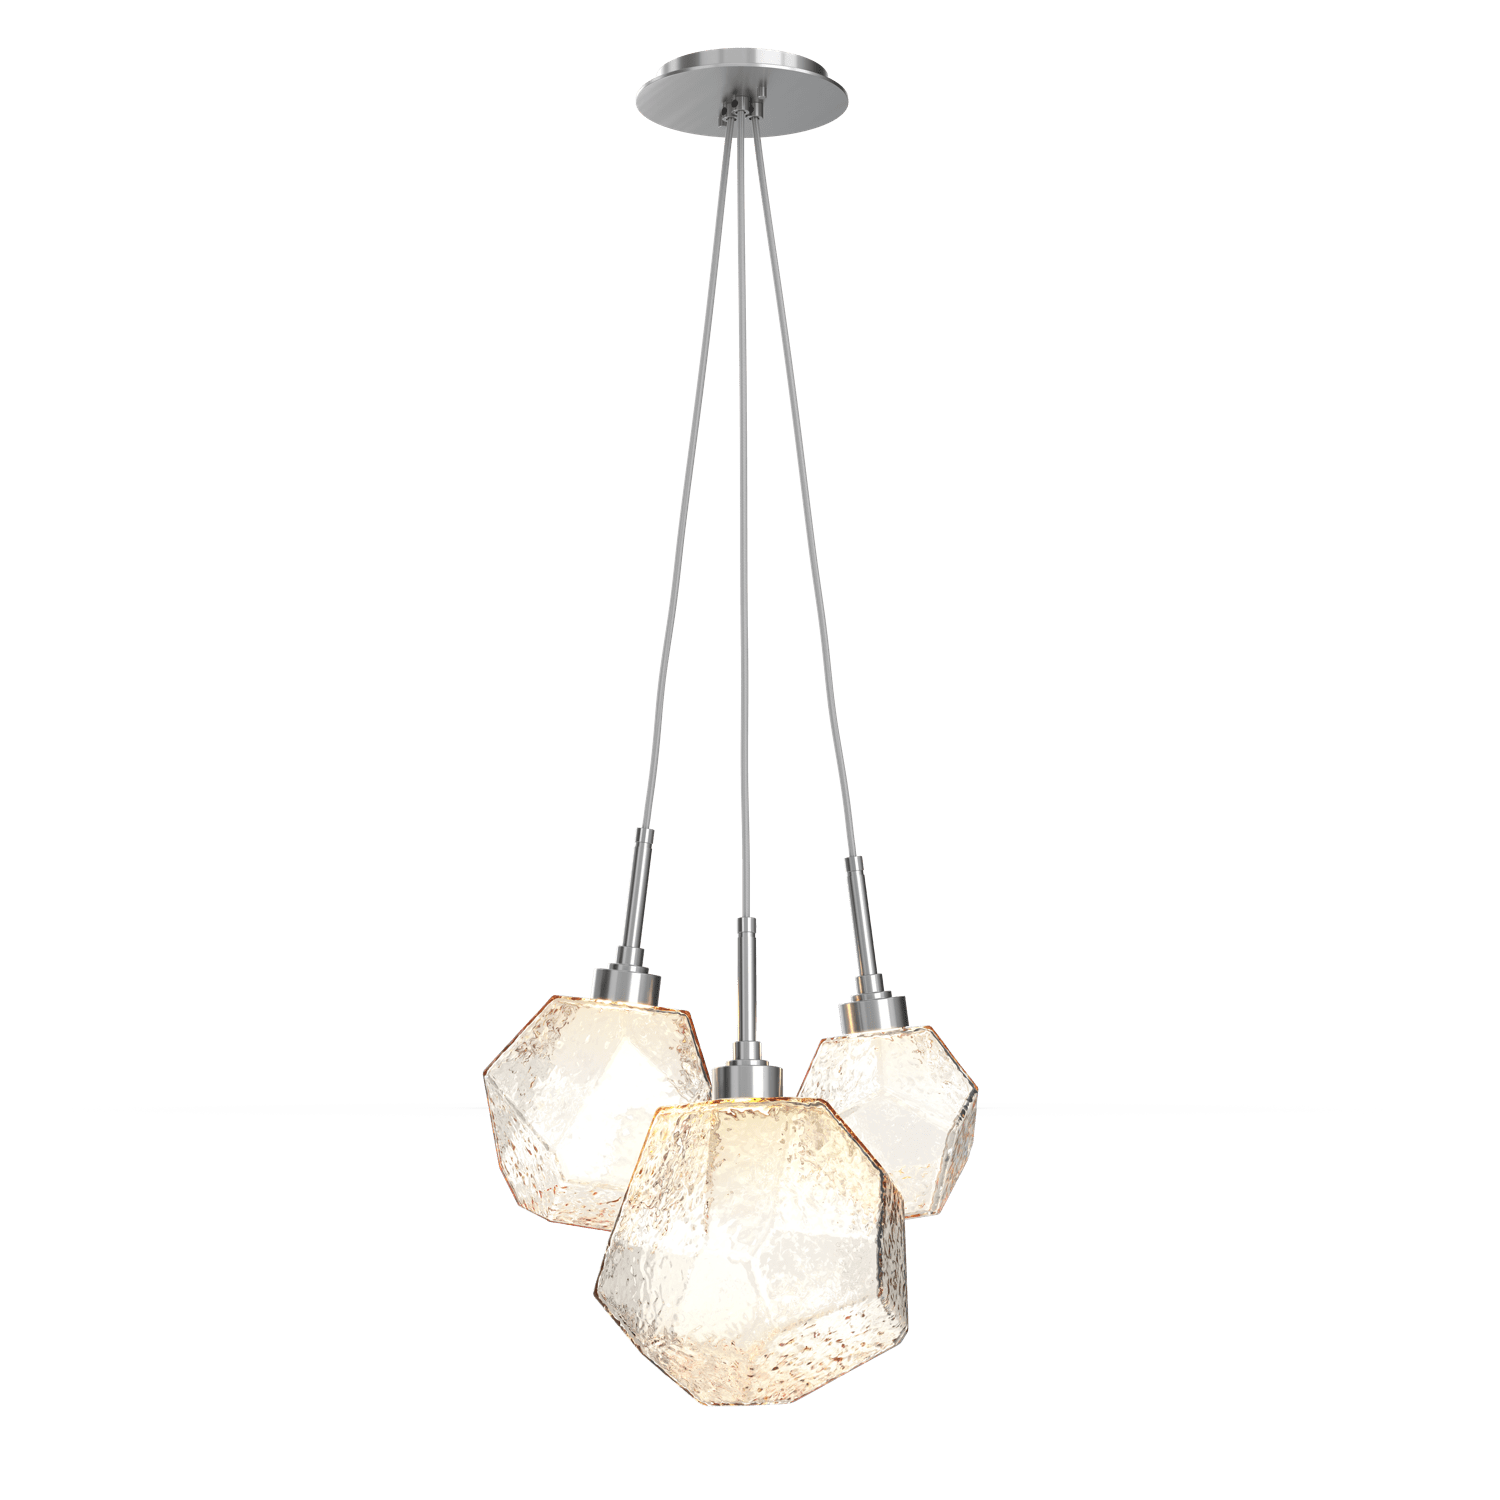 CHB0039-0E-SN-A-Hammerton-Studio-Gem-3-light-cluster-pendant-light-with-satin-nickel-finish-and-amber-blown-glass-shades-and-LED-lamping